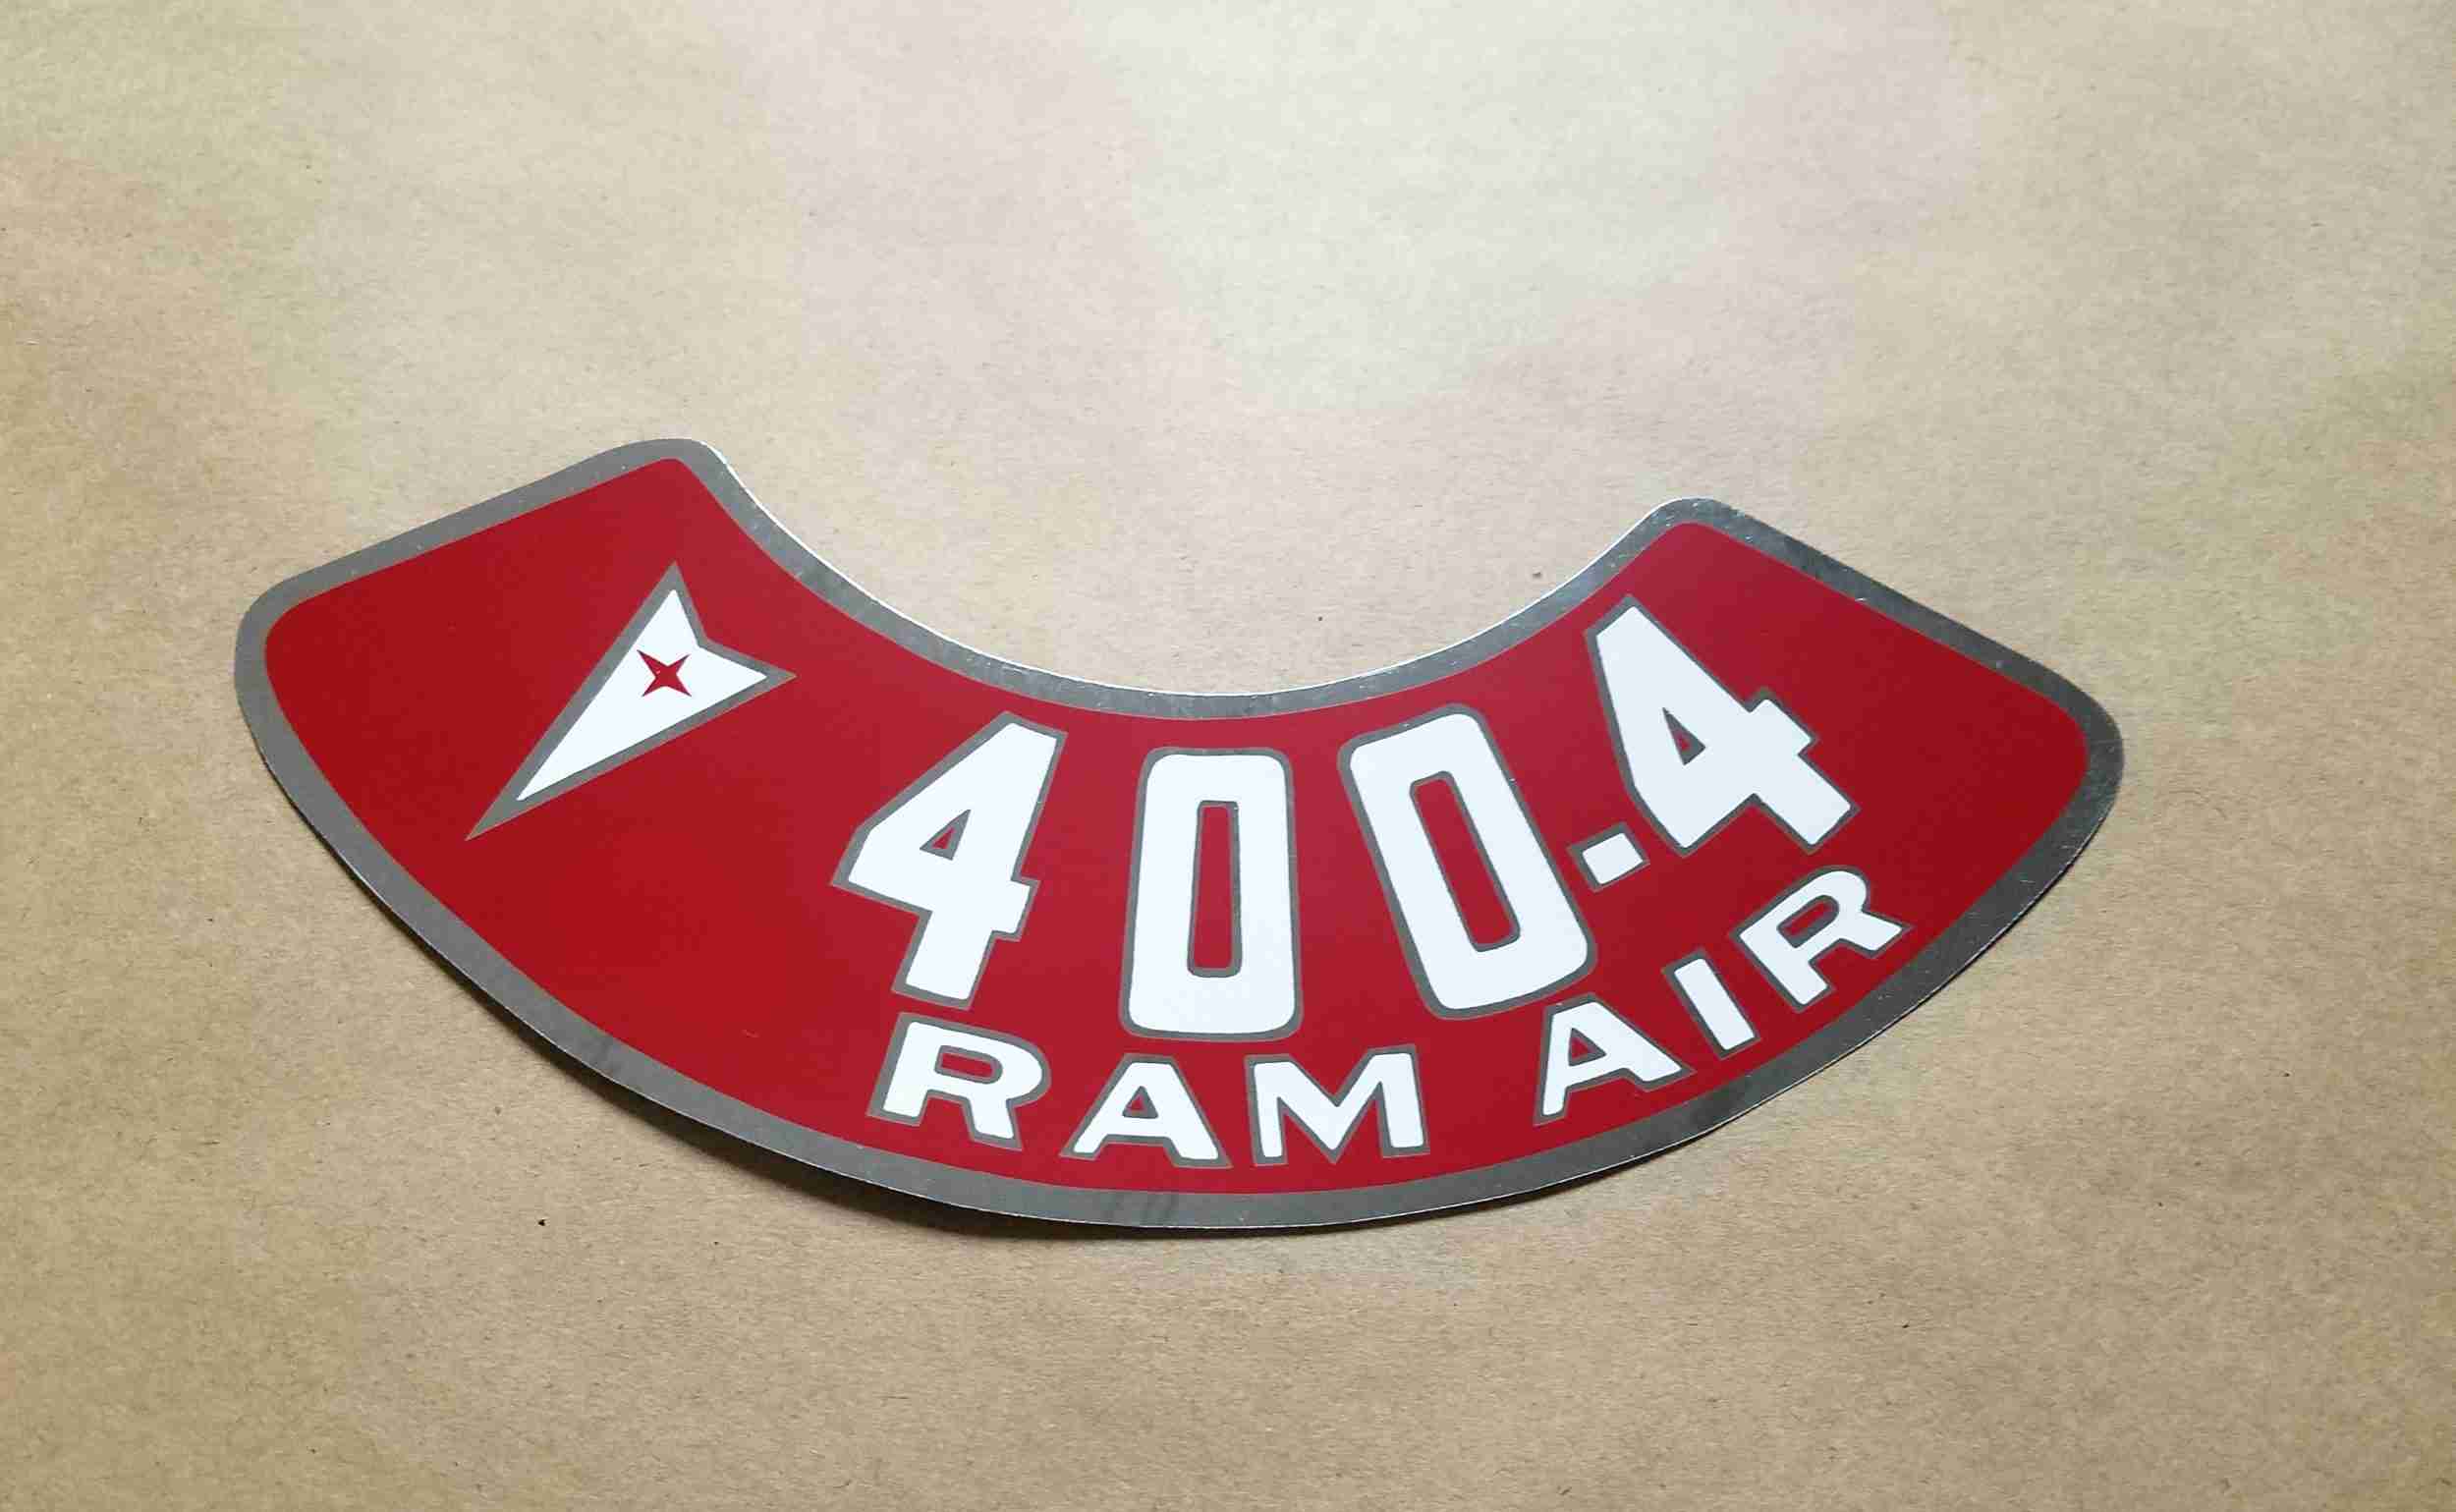 400-4V Ram Air air cleaner decal - after market